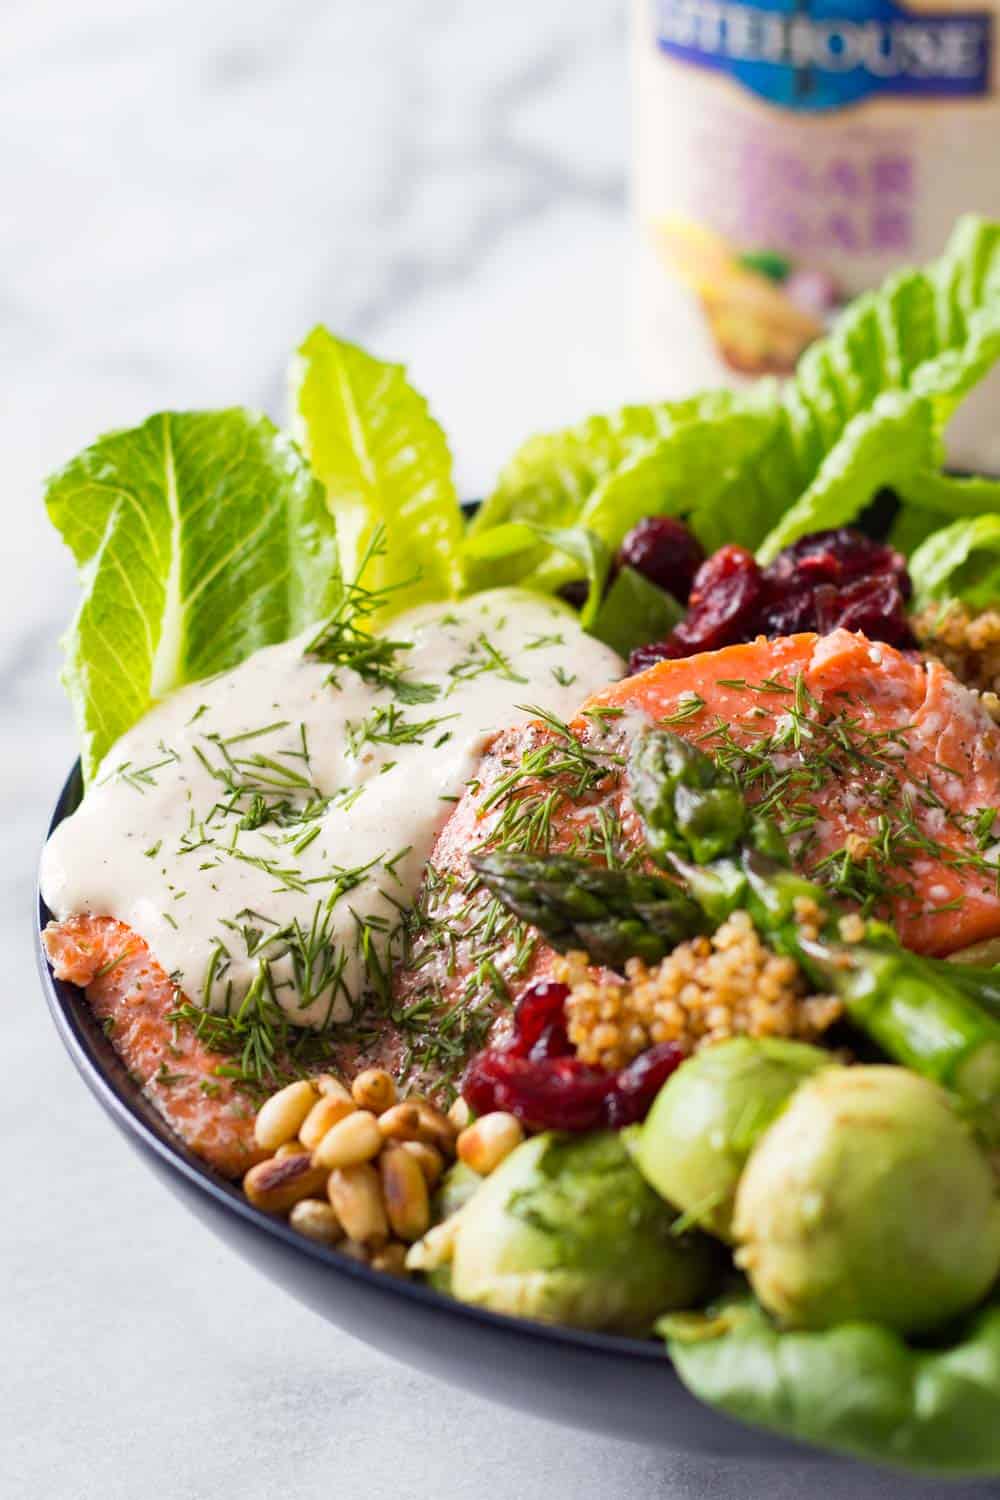 Baked Sockeye Salmon topped with creamy caesar dressing and served with lettuce leaves, dried cranberries, pine nuts, asparagus, avocado balls and quinoa.